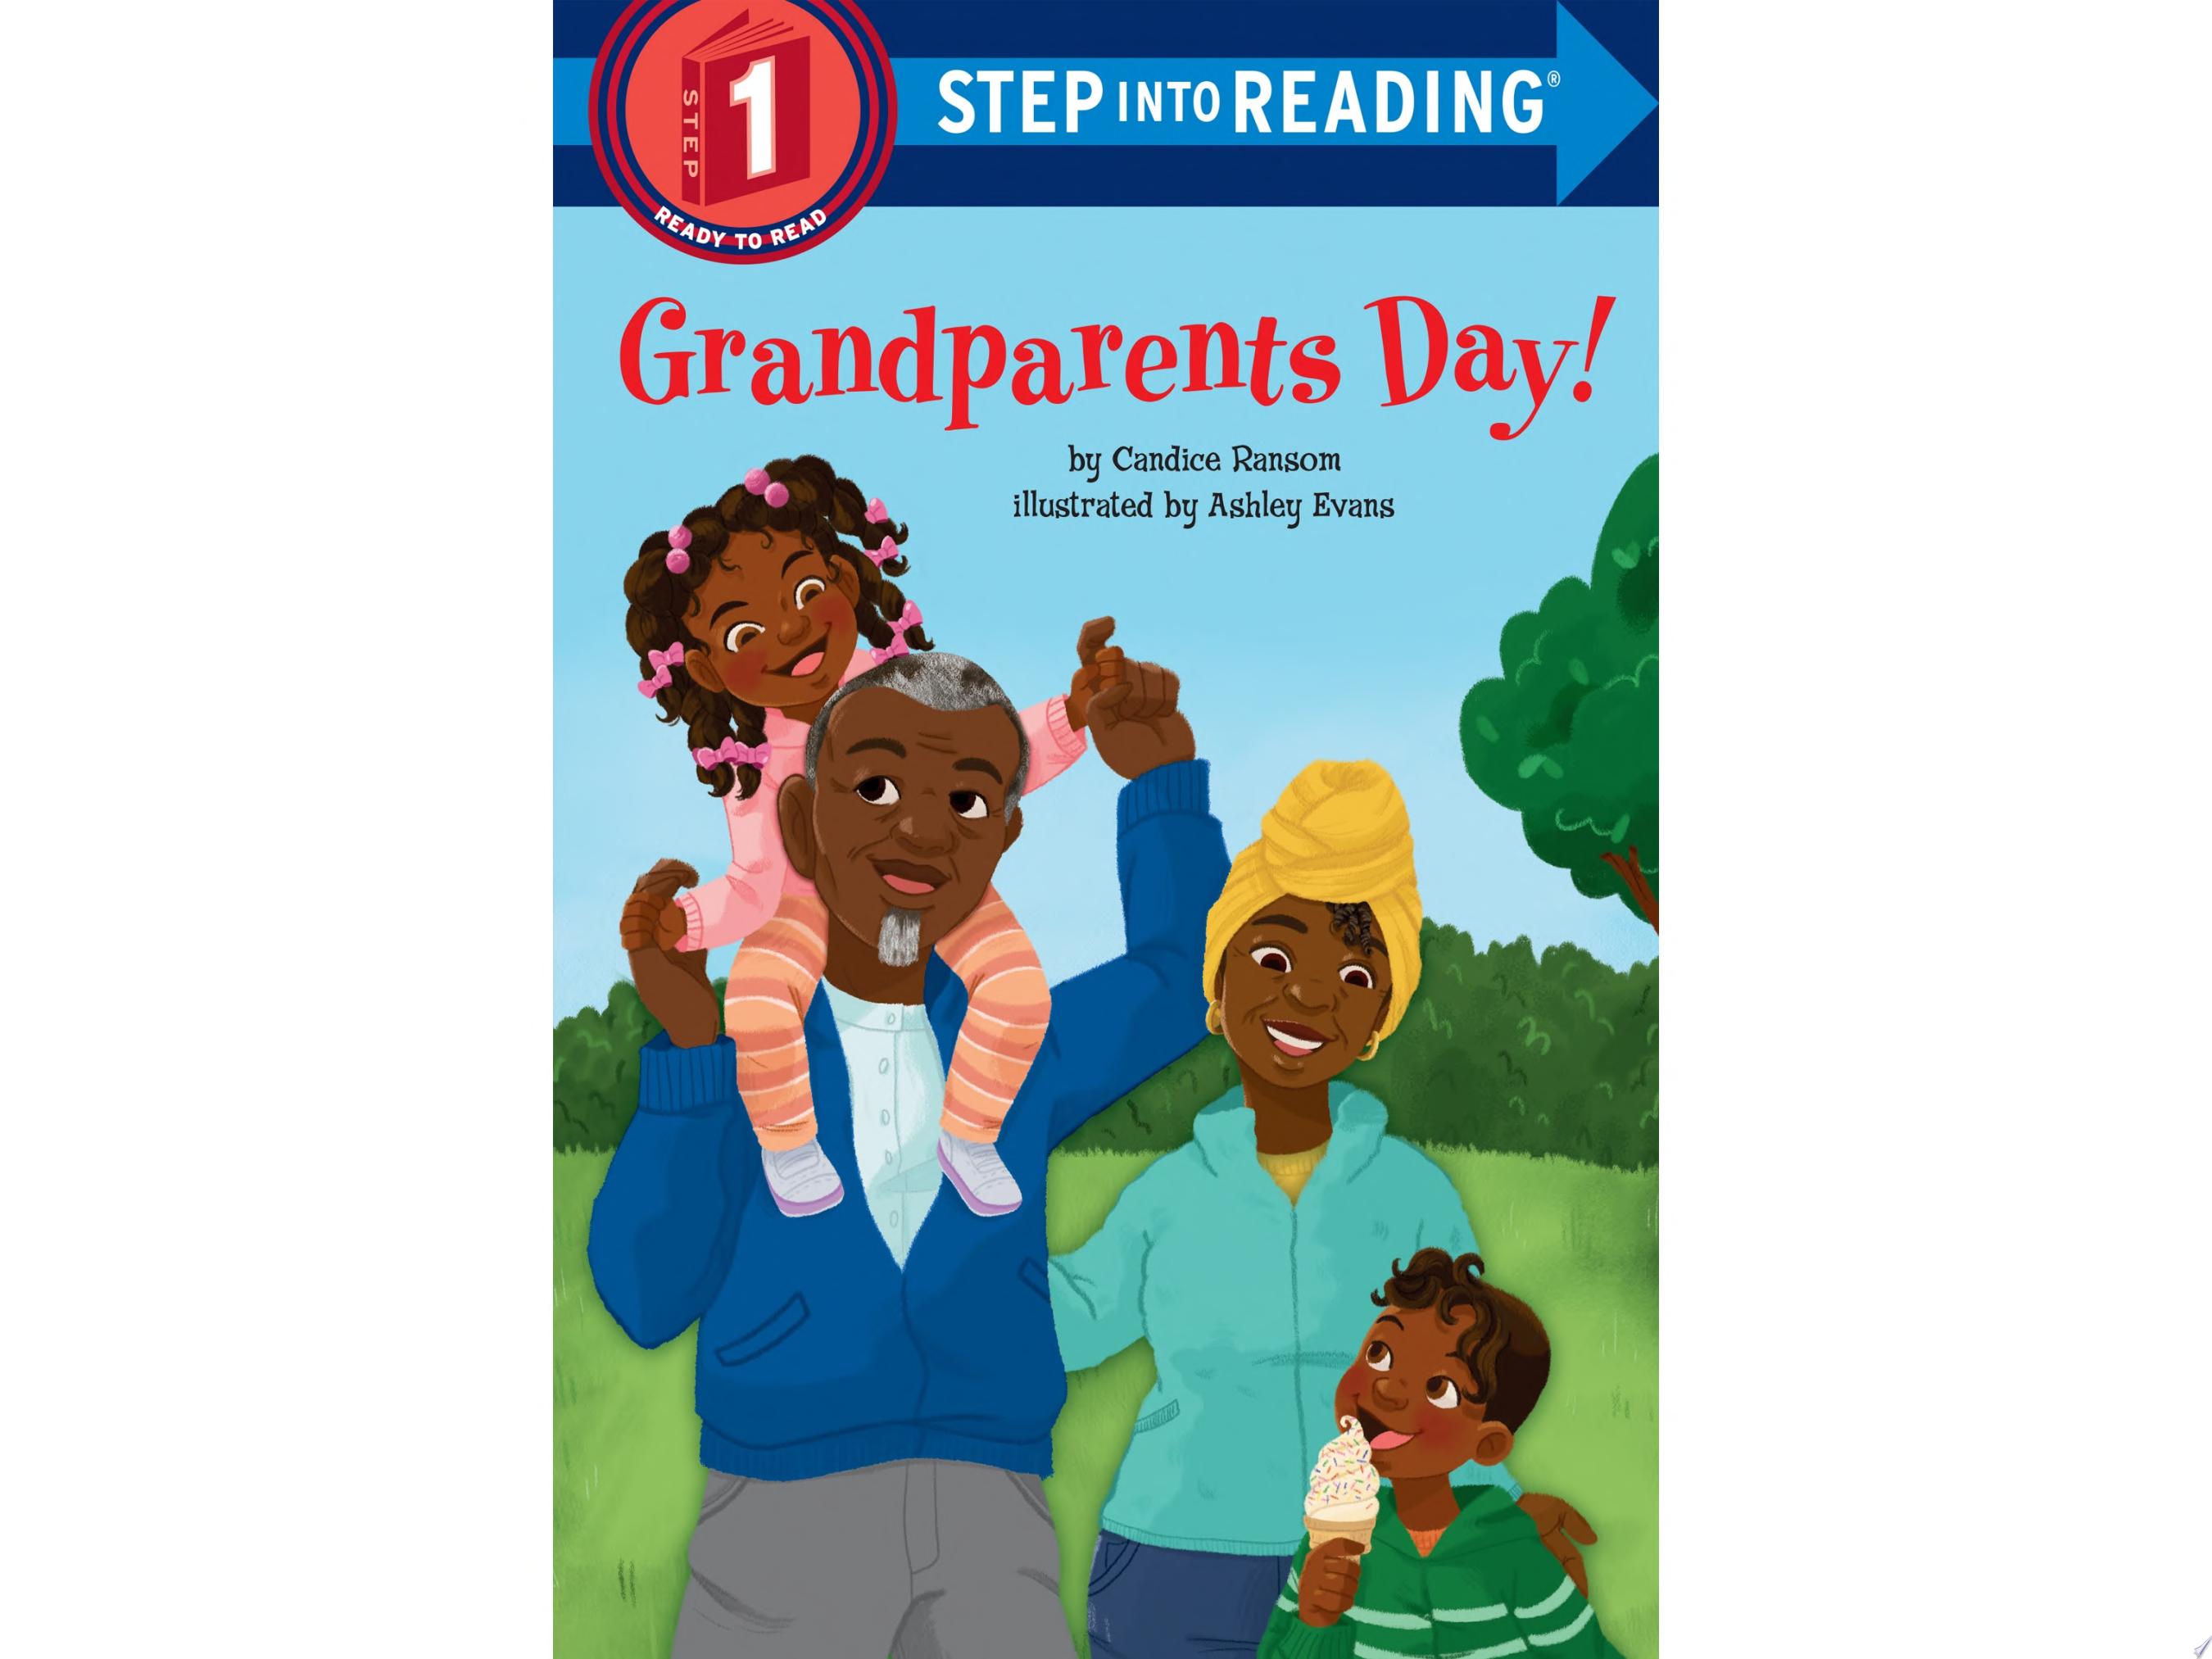 Image for "Grandparents Day!"